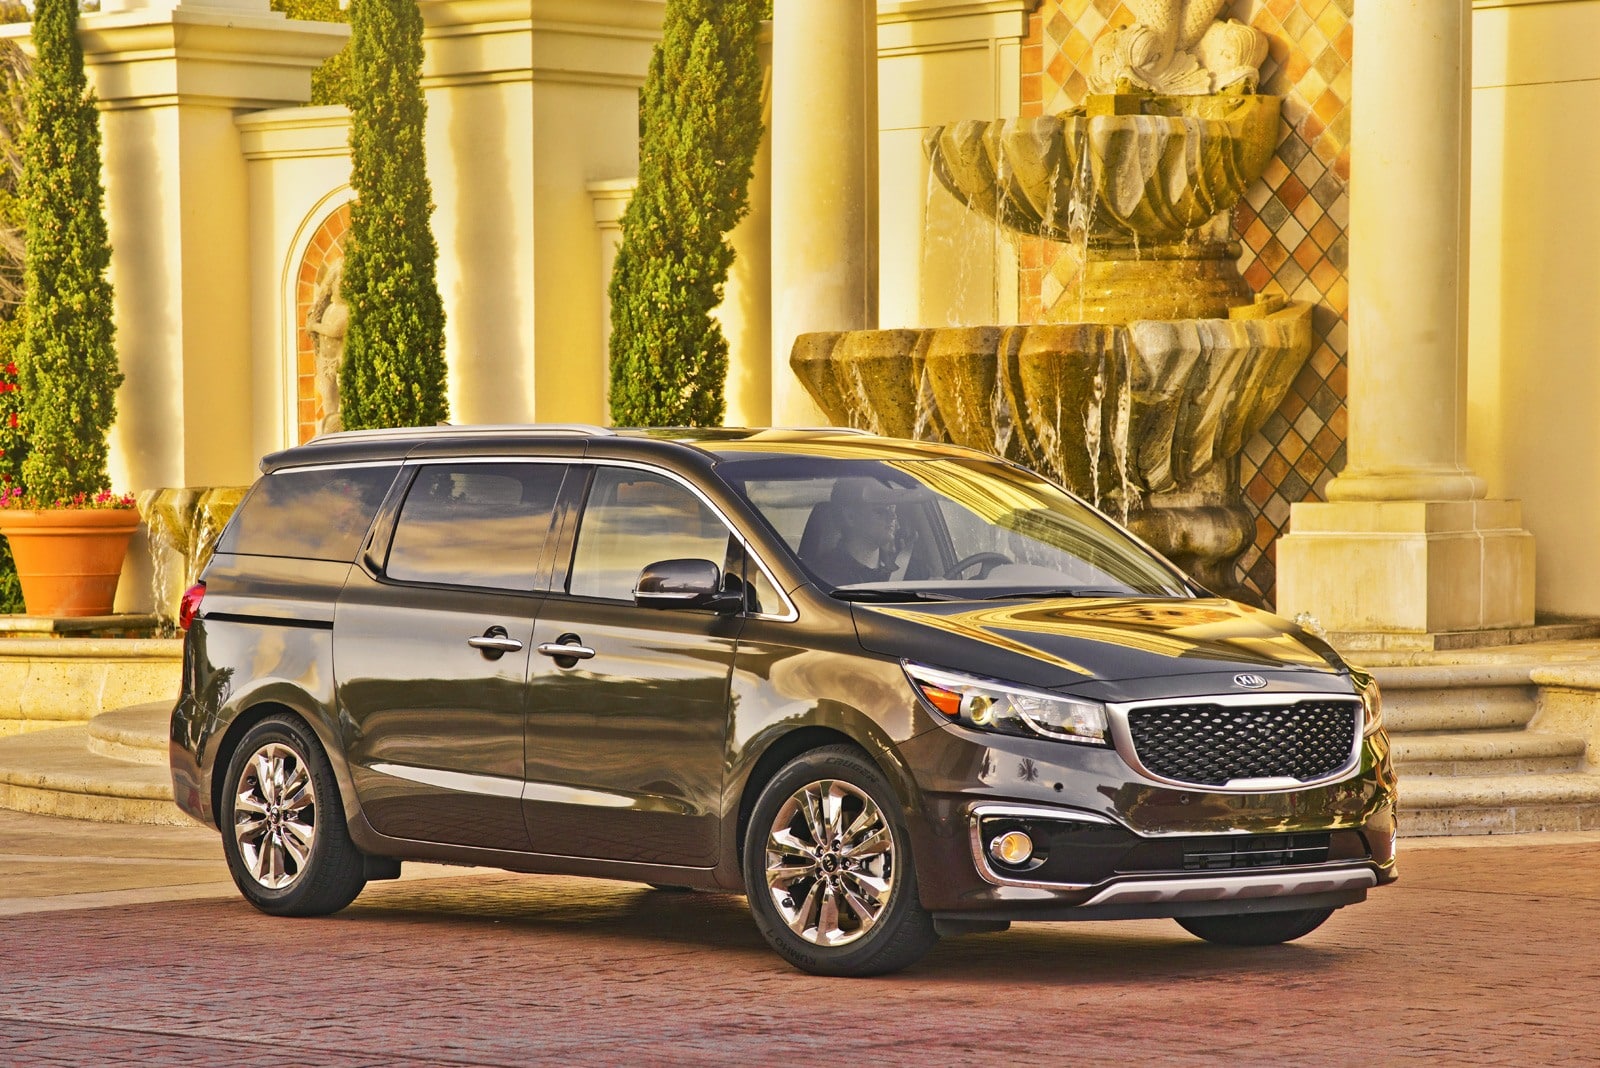 Top 10 Best Family Cars for Under $30,000 » AutoGuide.com News